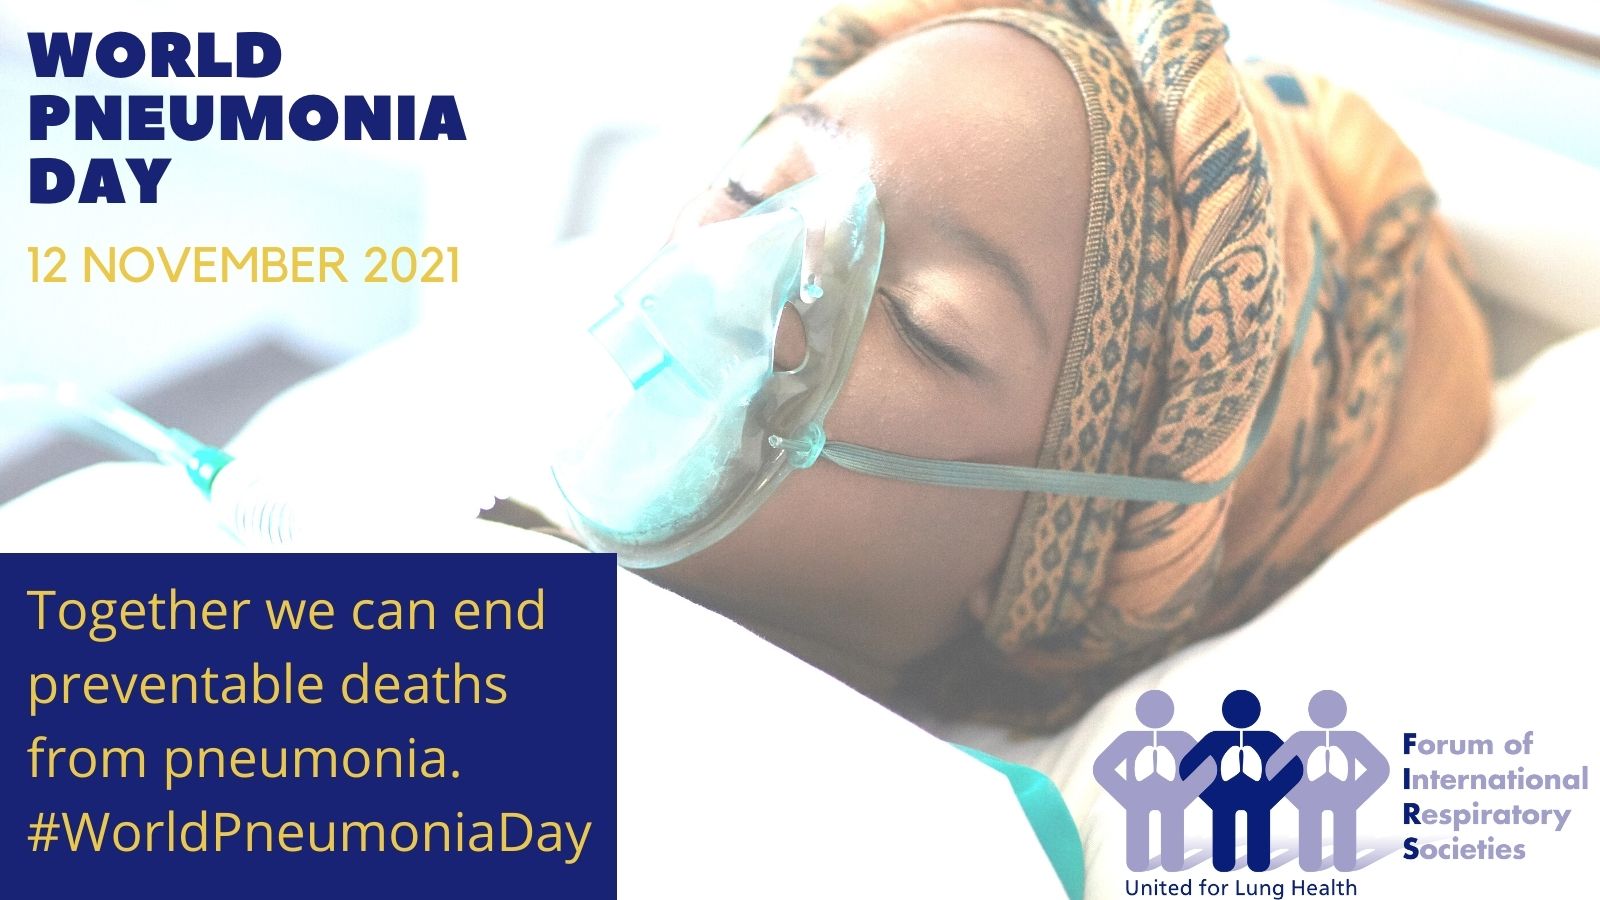 Global efforts must be strengthened to end the preventable burden of pneumonia